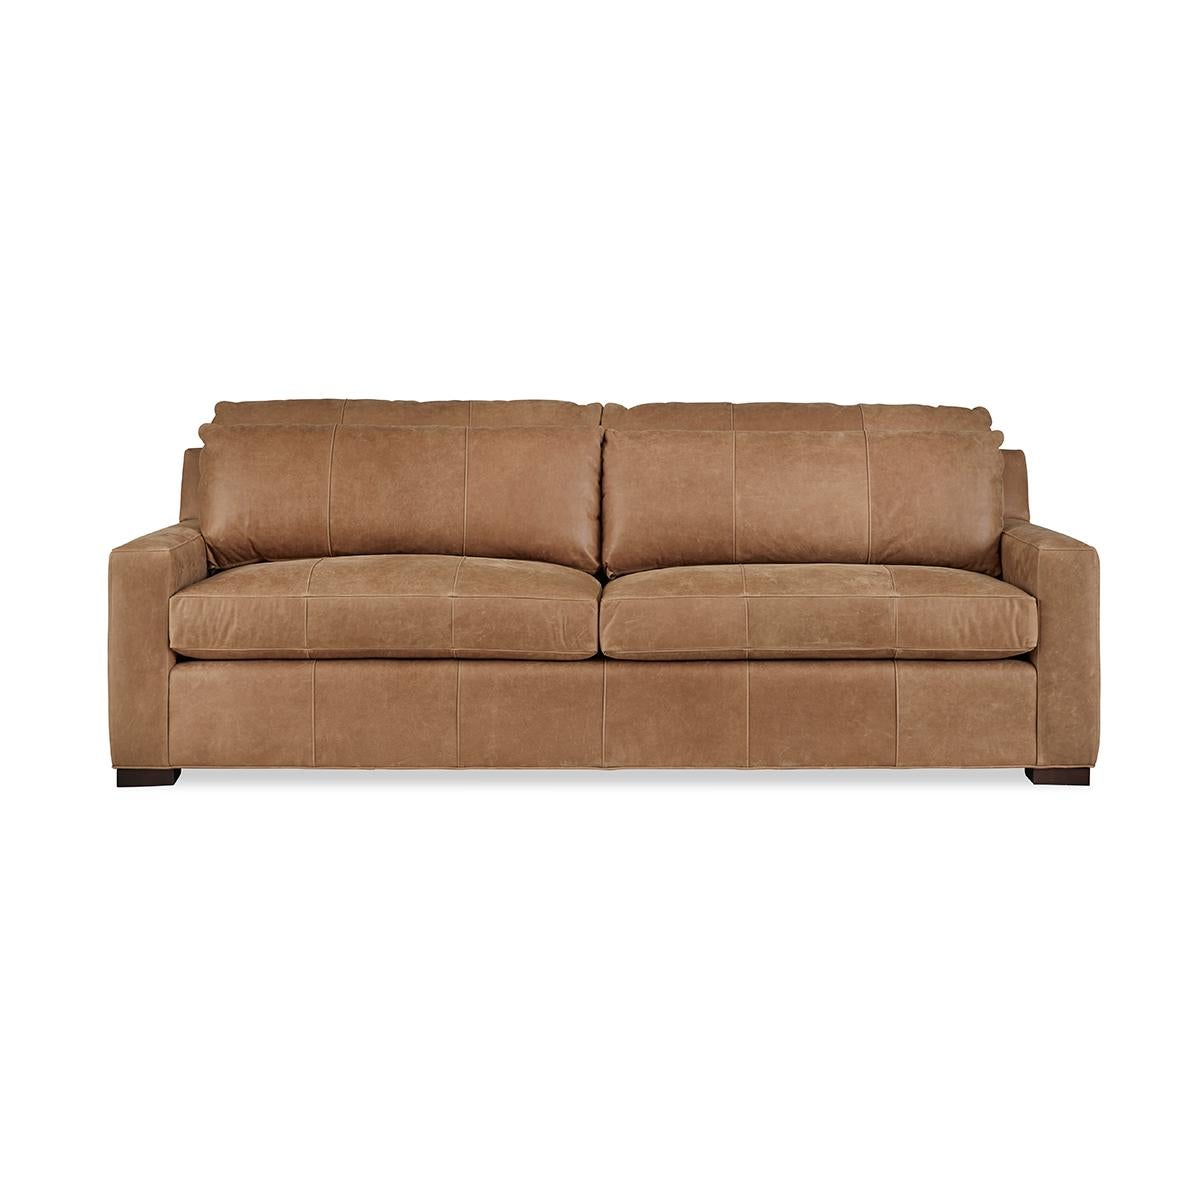 Modern leather upholstered sofa with bold modern lines and raised on bold square block feet. Long loose pillow backs with two long comfort down seat cushions.

Completely Made in USA, with traditional 8-way hand-tied construction and US grown -